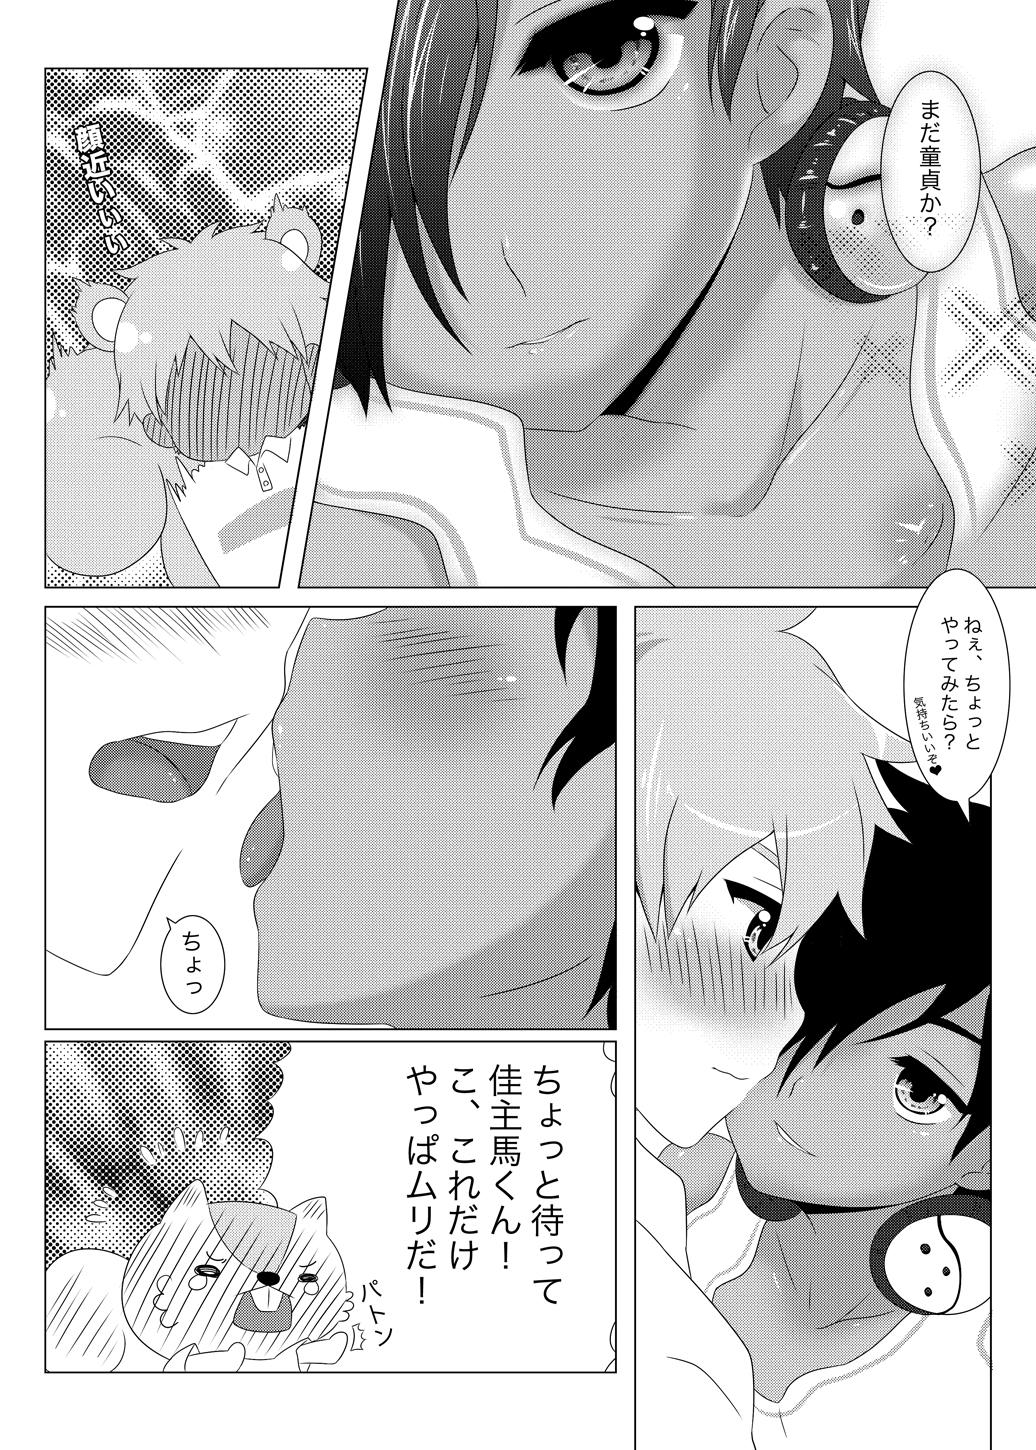 Orgy Another Summer 2 - Summer wars Twistys - Page 3